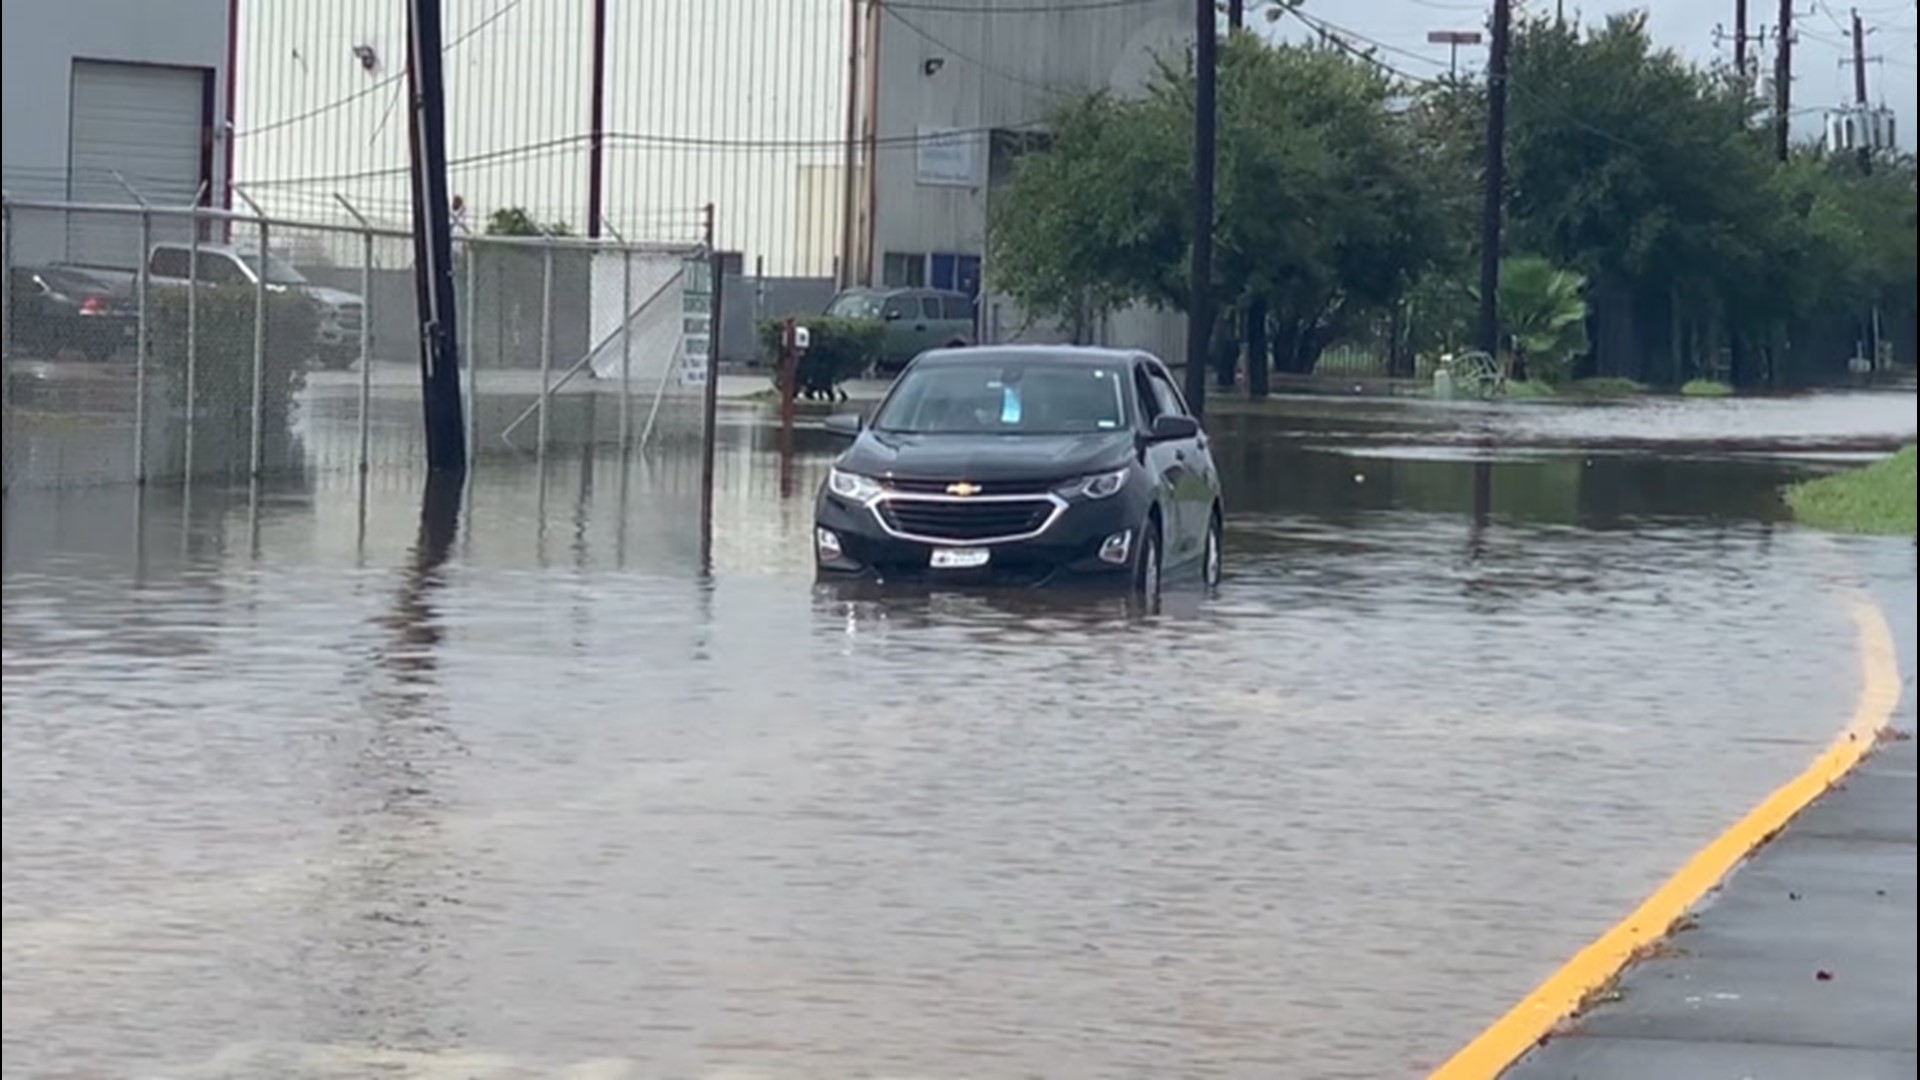 While firefighters rescued roughly 100 people from flooding during Tropical Storm Beta, citizens also jumped in to help people in trouble in Houston, Texas, on Sept. 22.